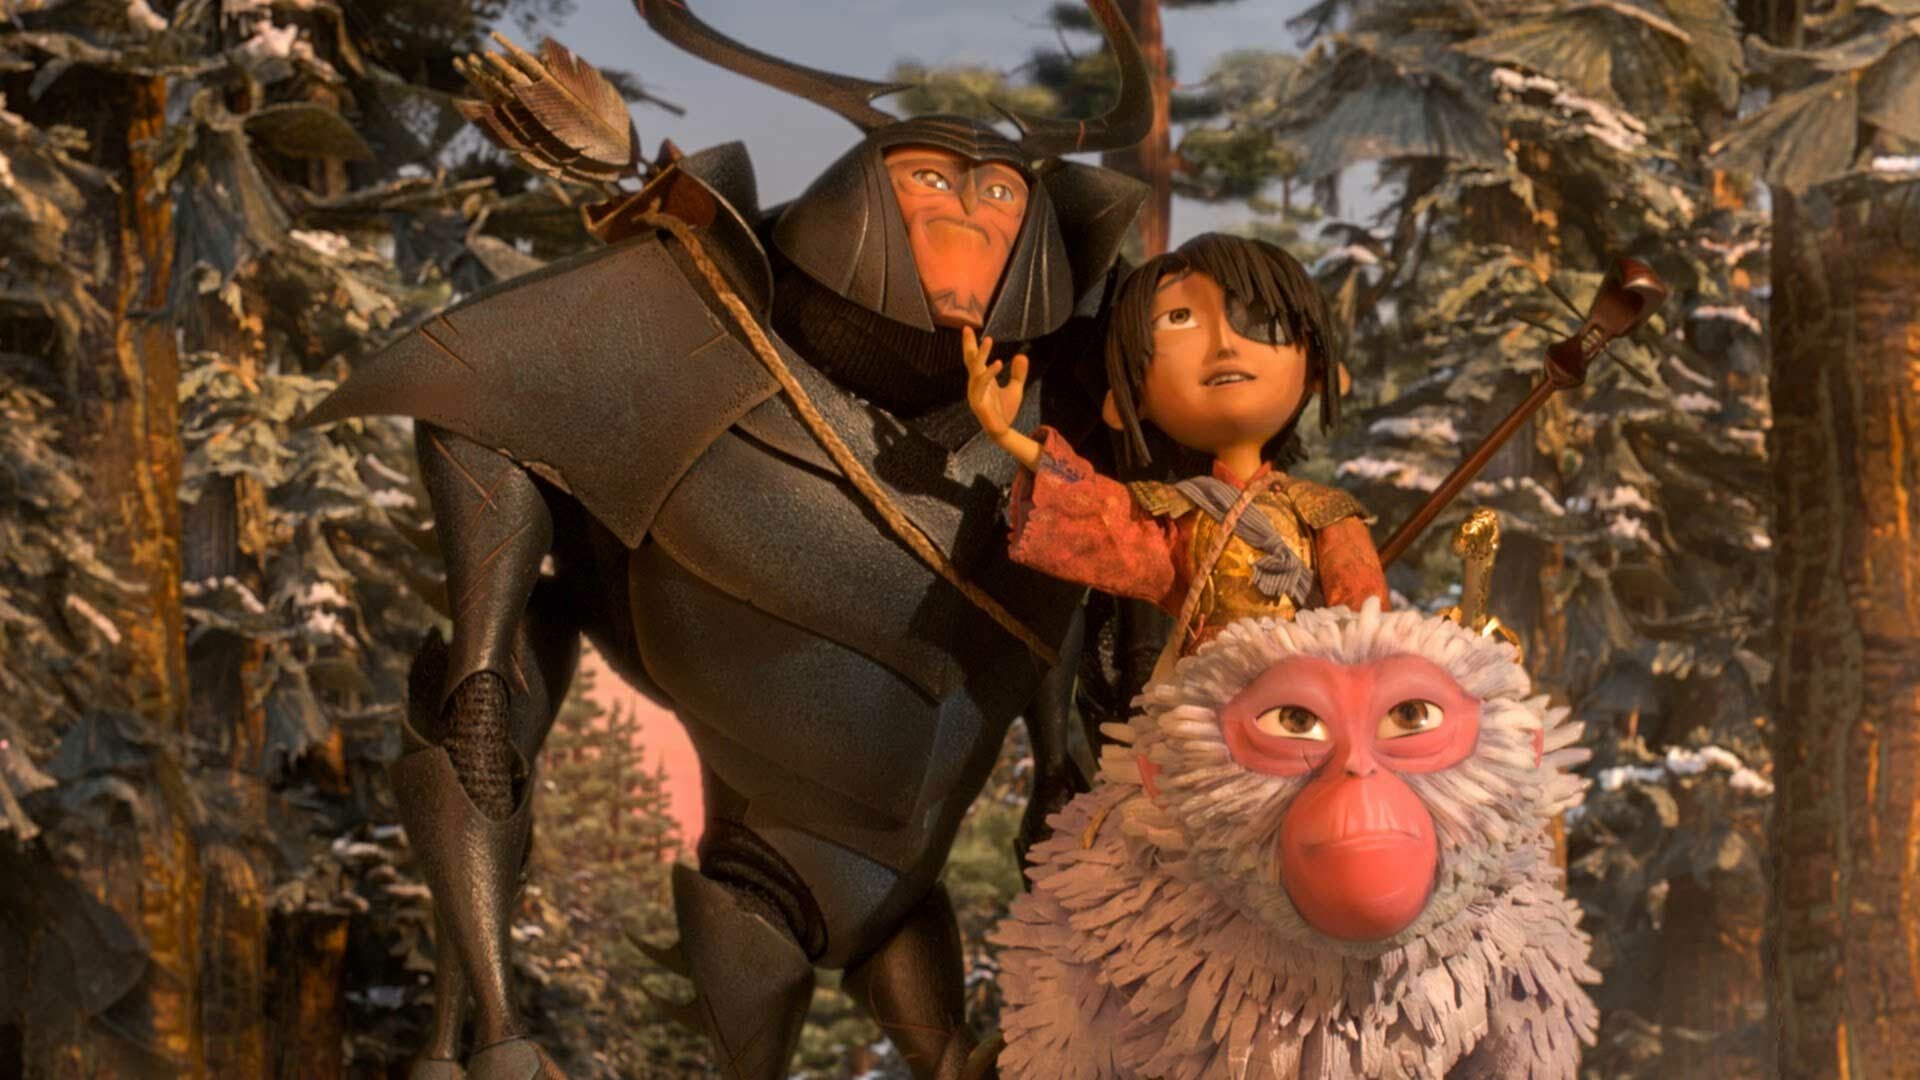 Kubo and the Two Strings: Fictional characters, Beetle, Monkey. 1920x1080 Full HD Wallpaper.